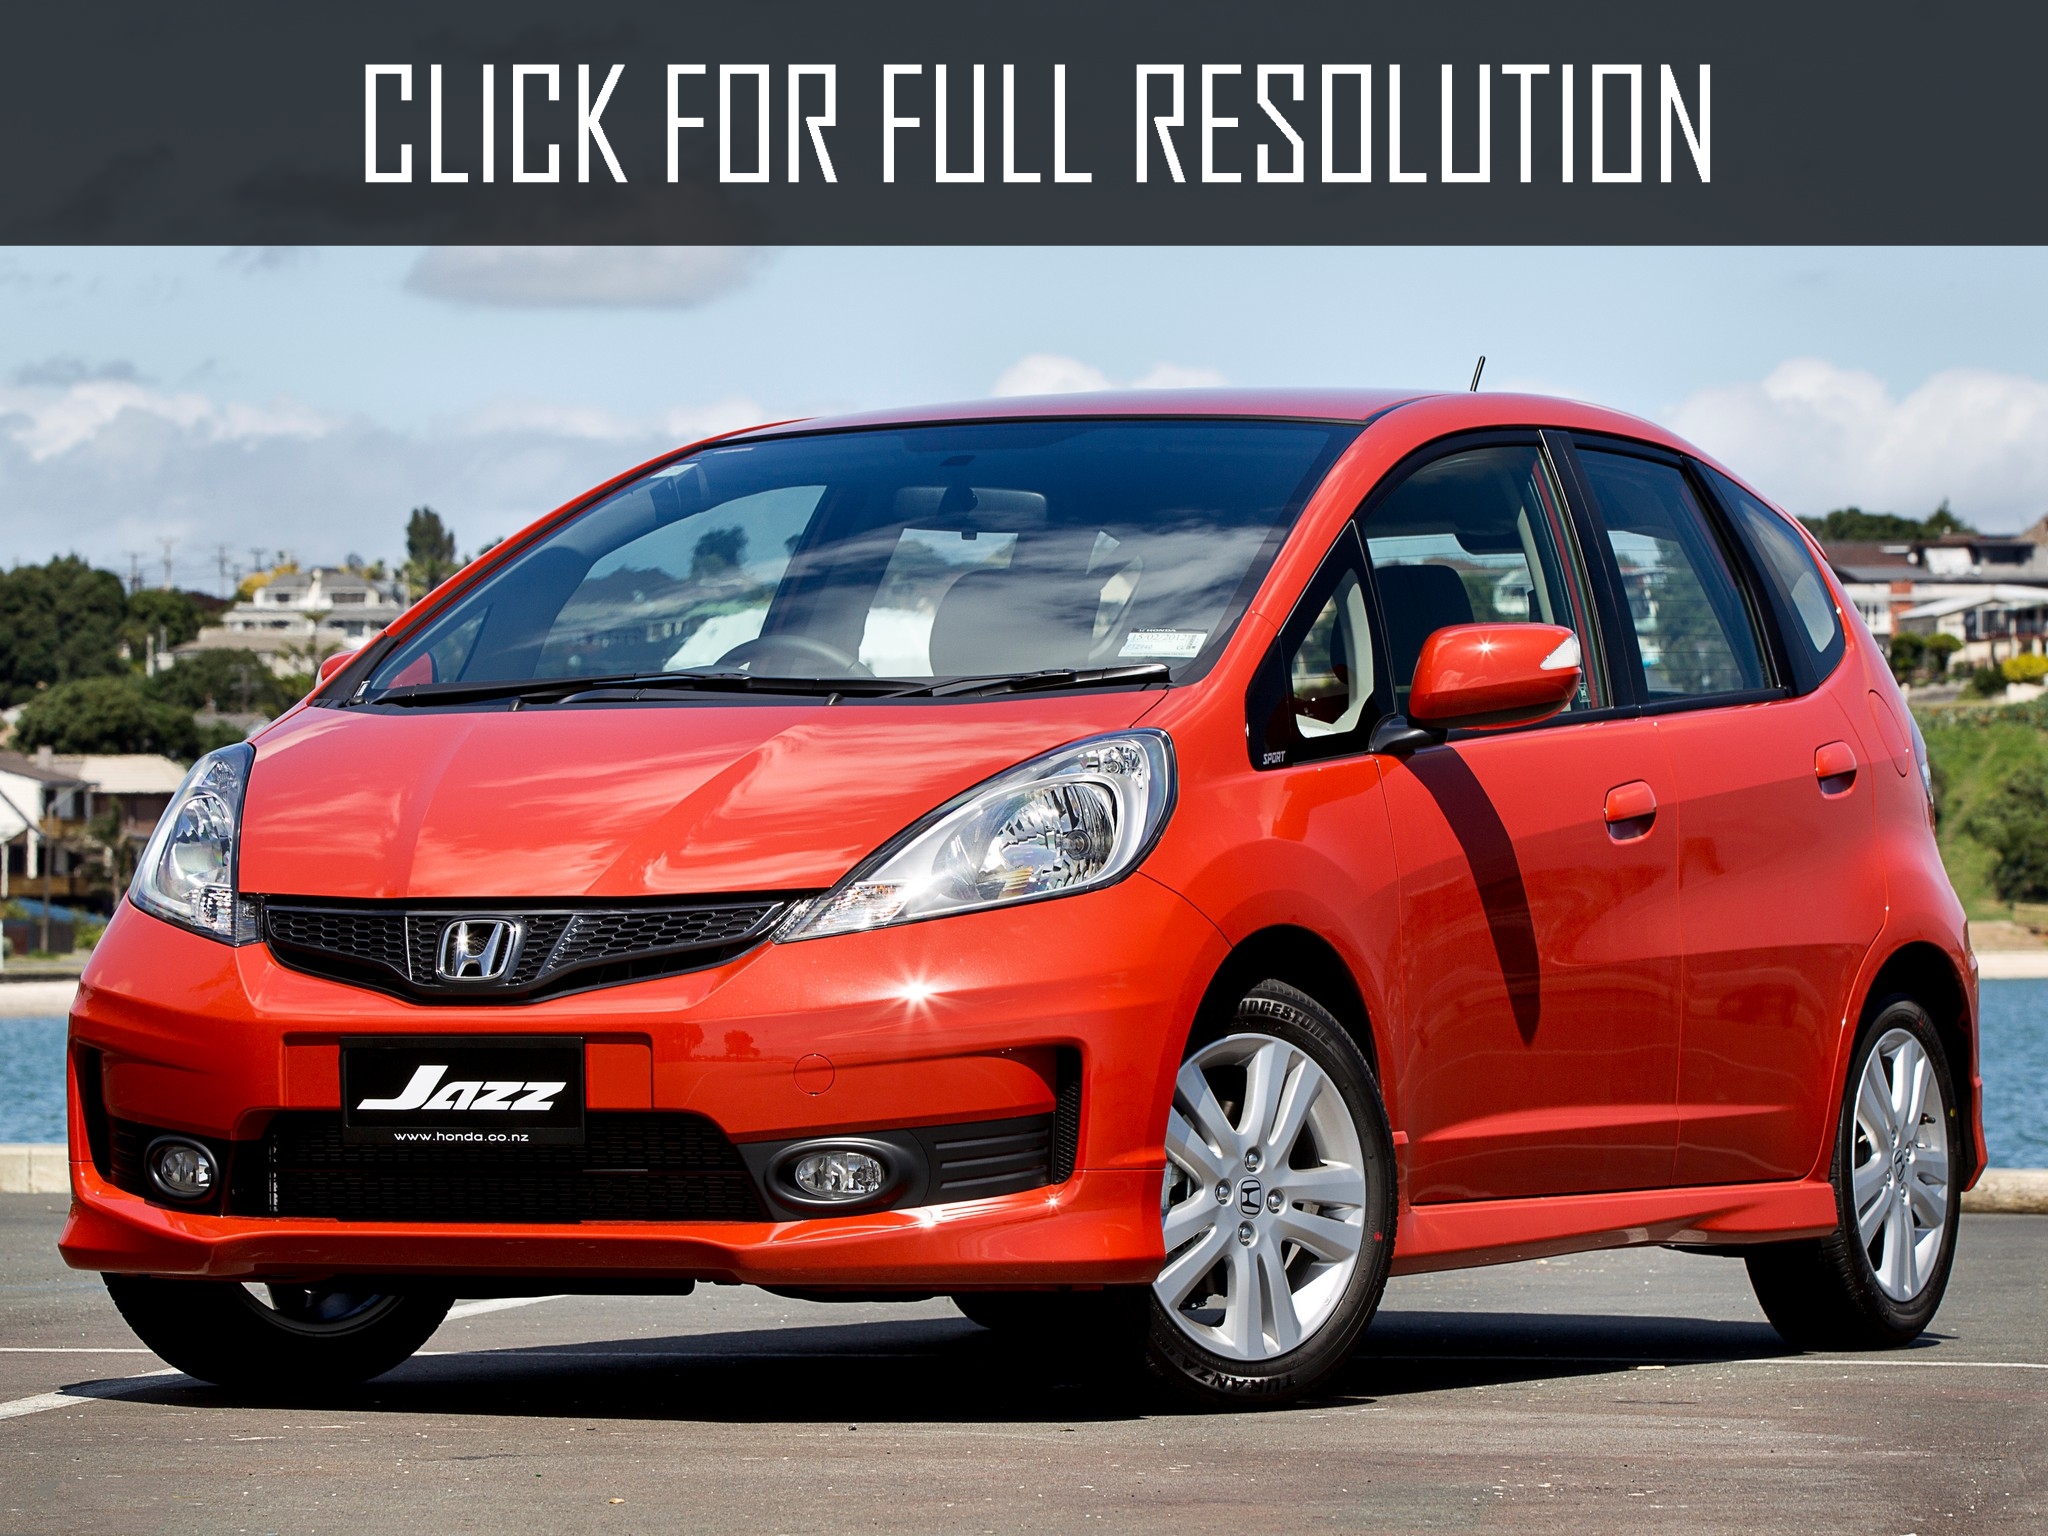 2011 Honda Jazz Sport news, reviews, msrp, ratings with